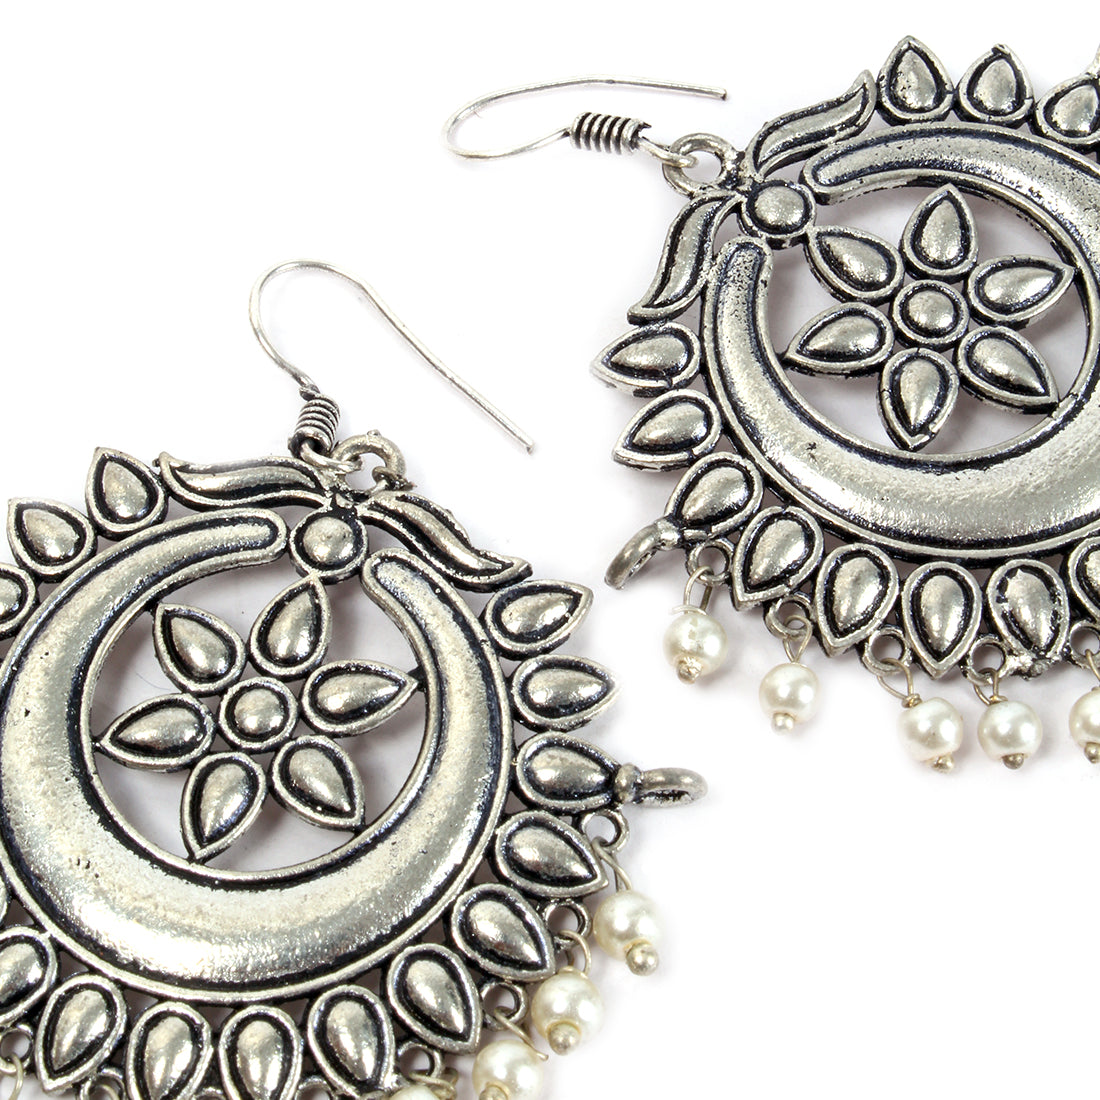 OVERSIZED HANDCRAFTED ETHNIC SILVER-TONED PEARL HOOK DROP EARRINGS